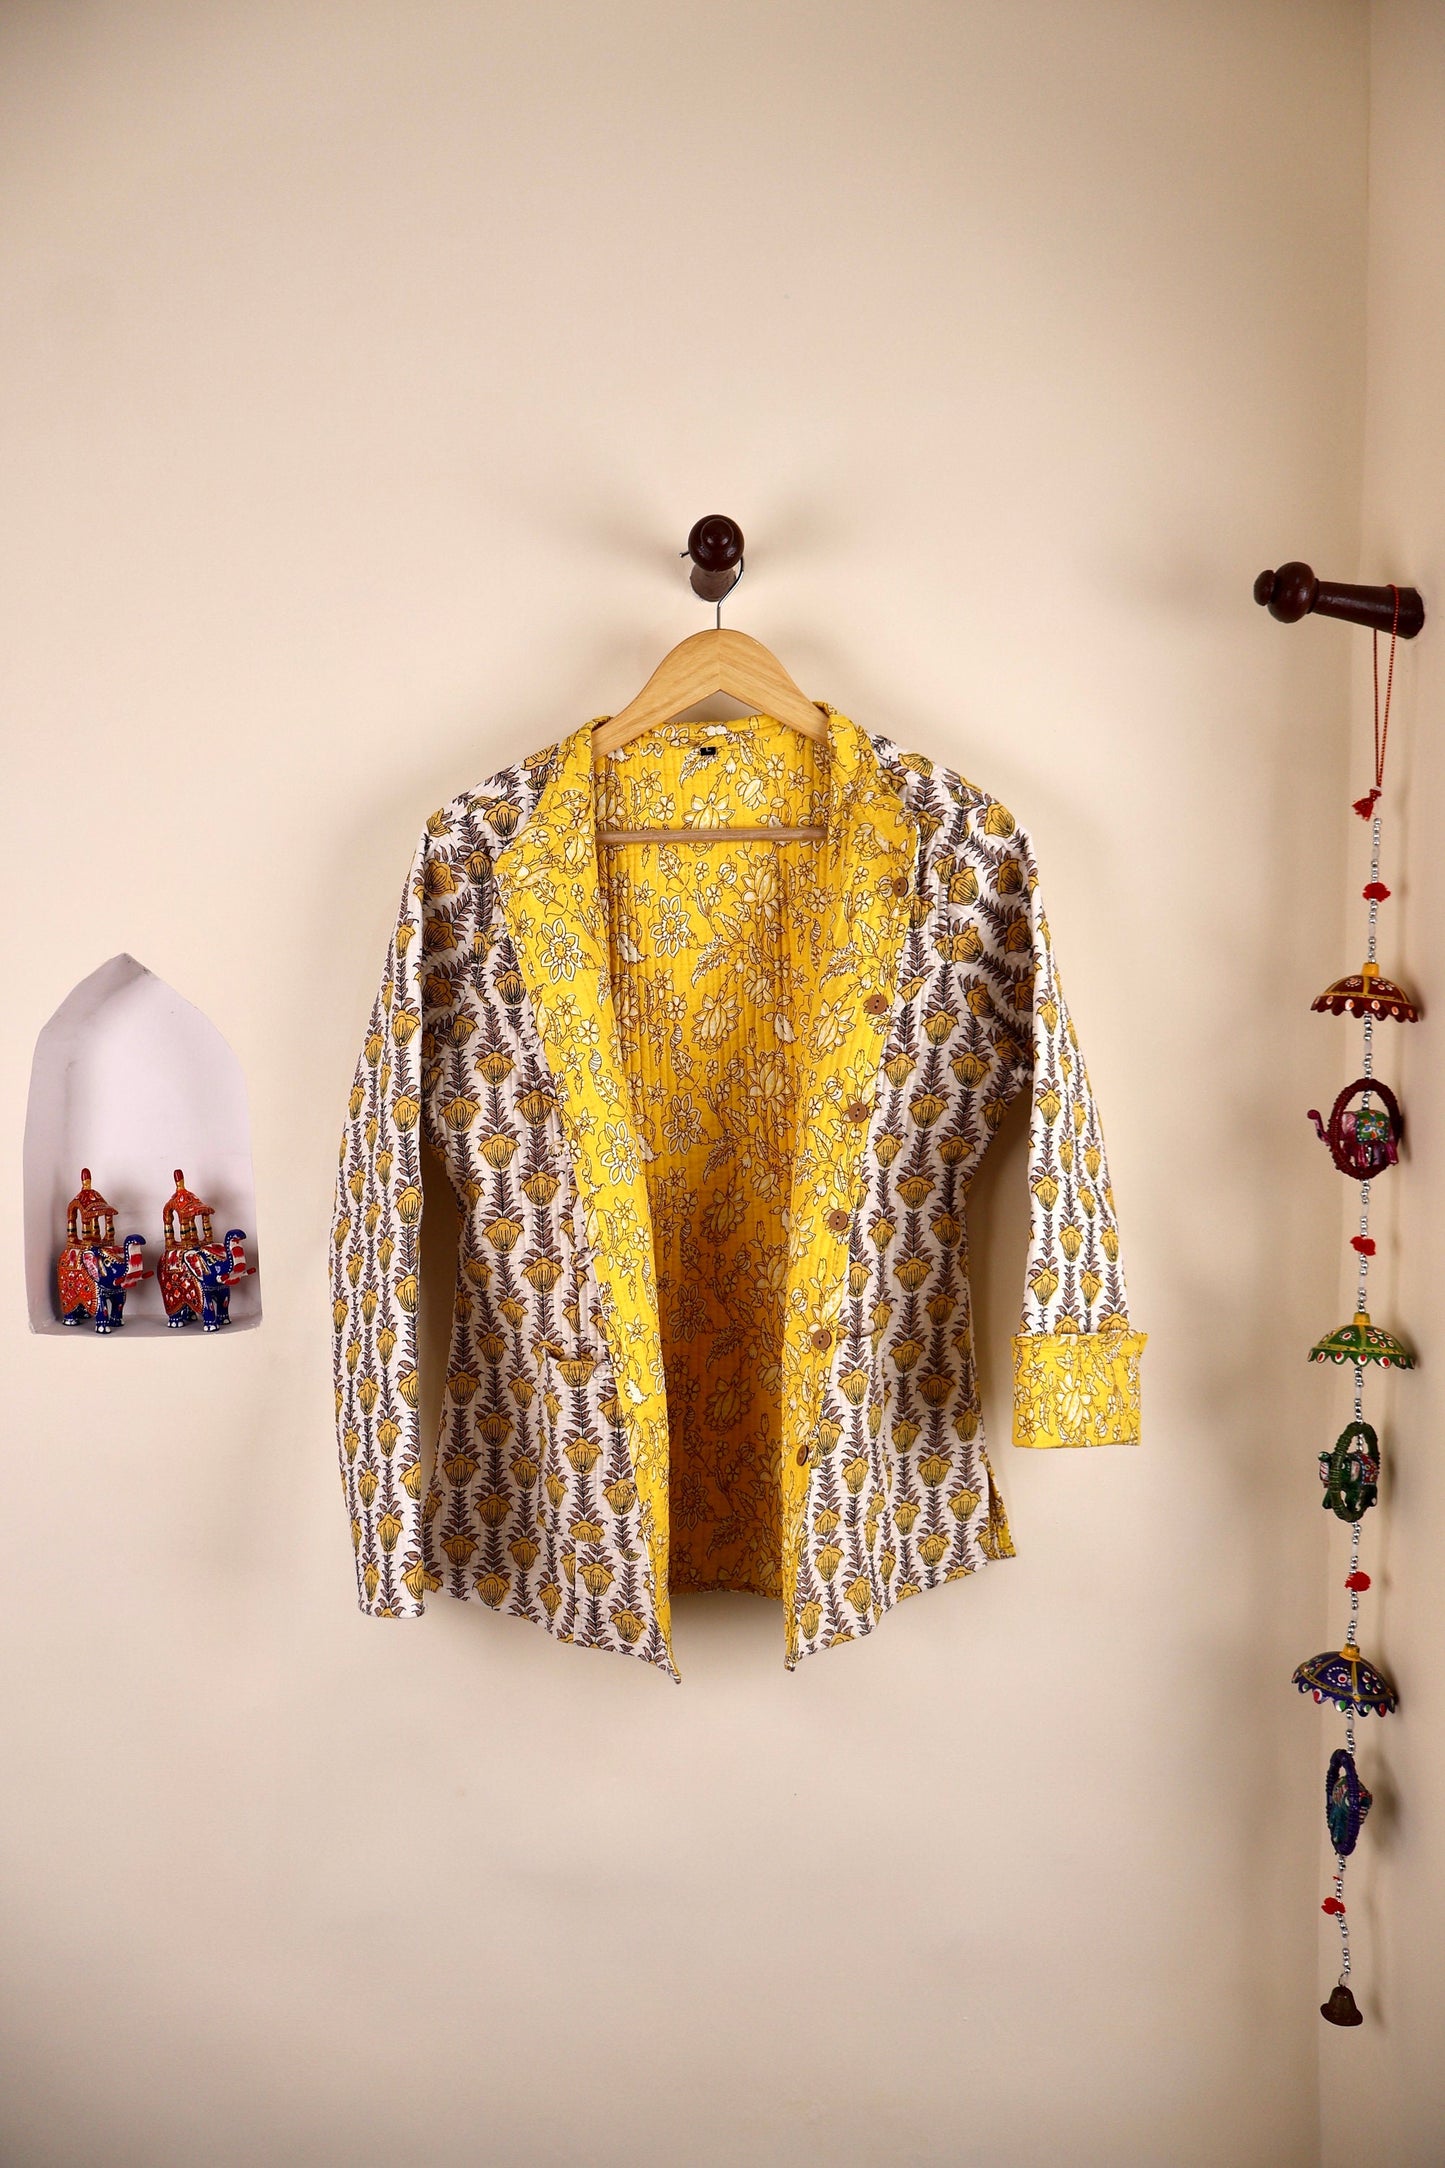 Indian Handmade Quilted Cotton Fabric Kantha Jacket Stylish White & Yellow Floral Bohemian Women's Coat, Reversible Waistcoat for Her